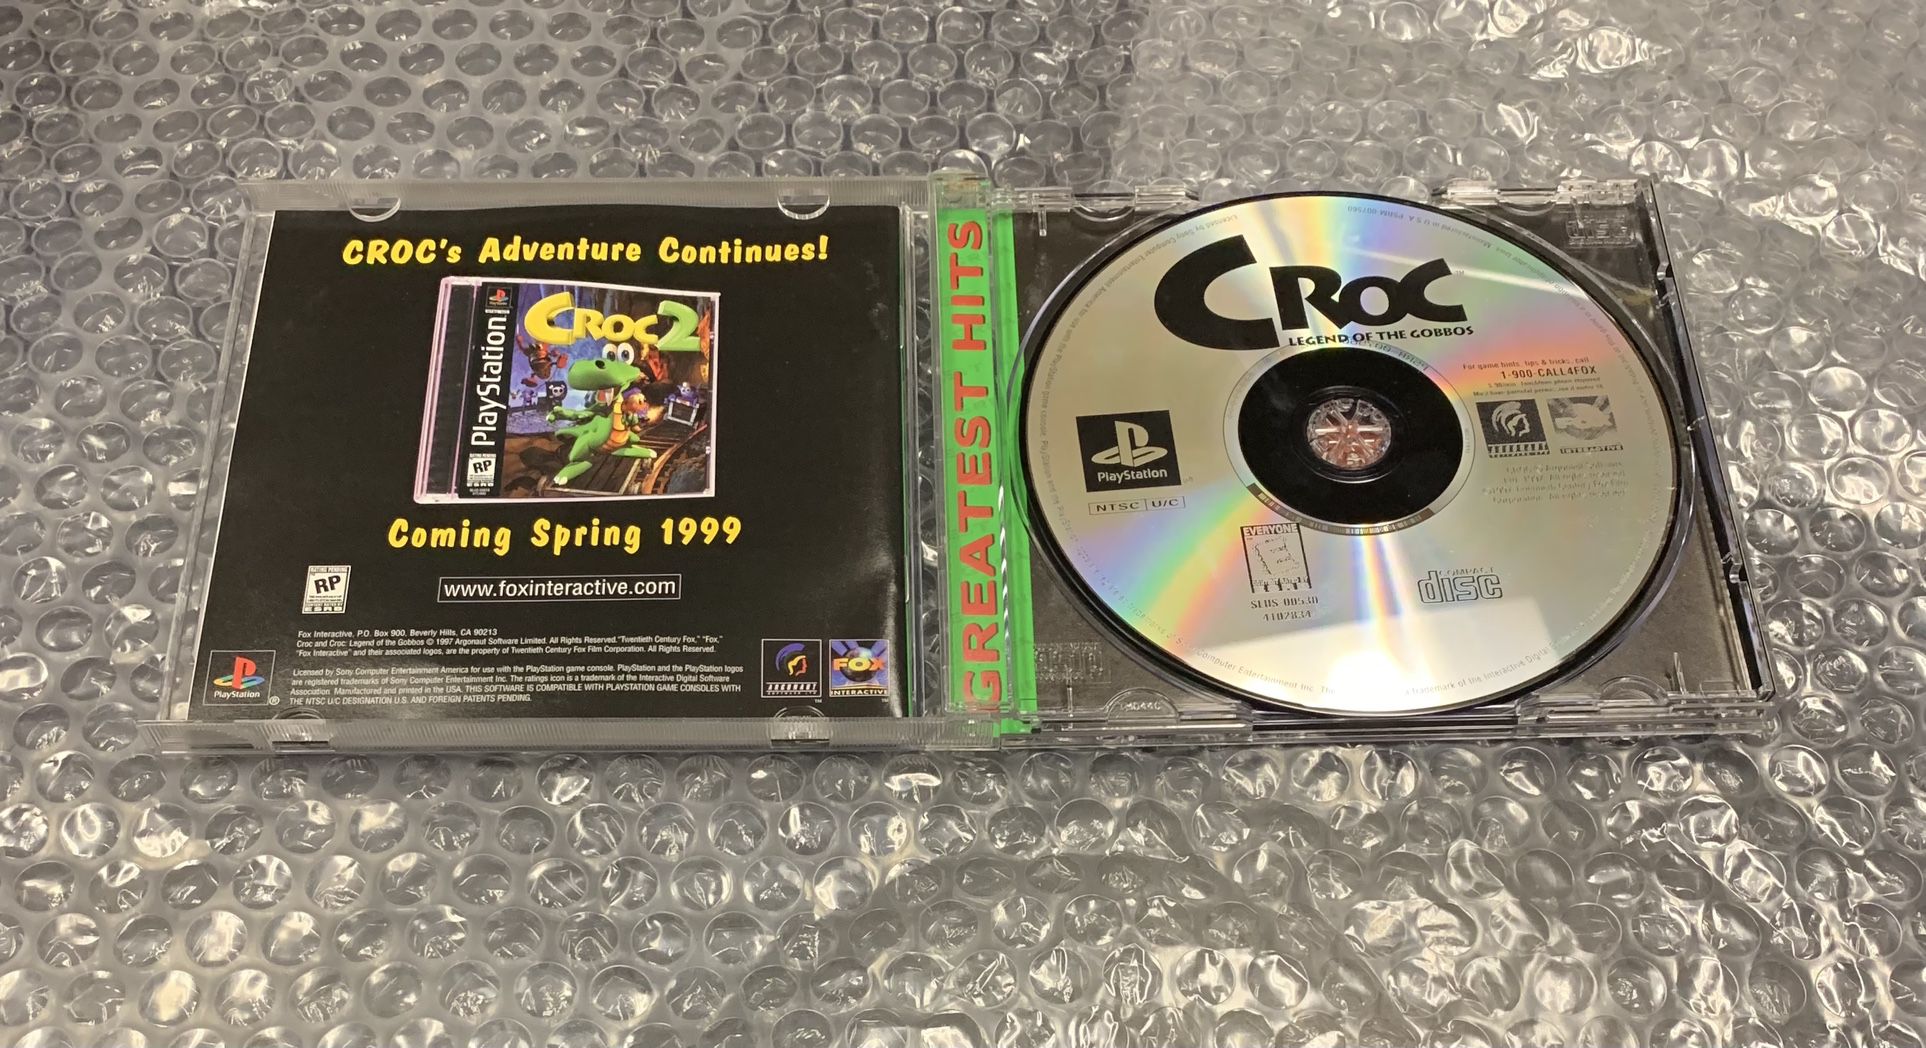 Croc: Legend Of Gobbos Playstation 1 PS1 Game For Sale